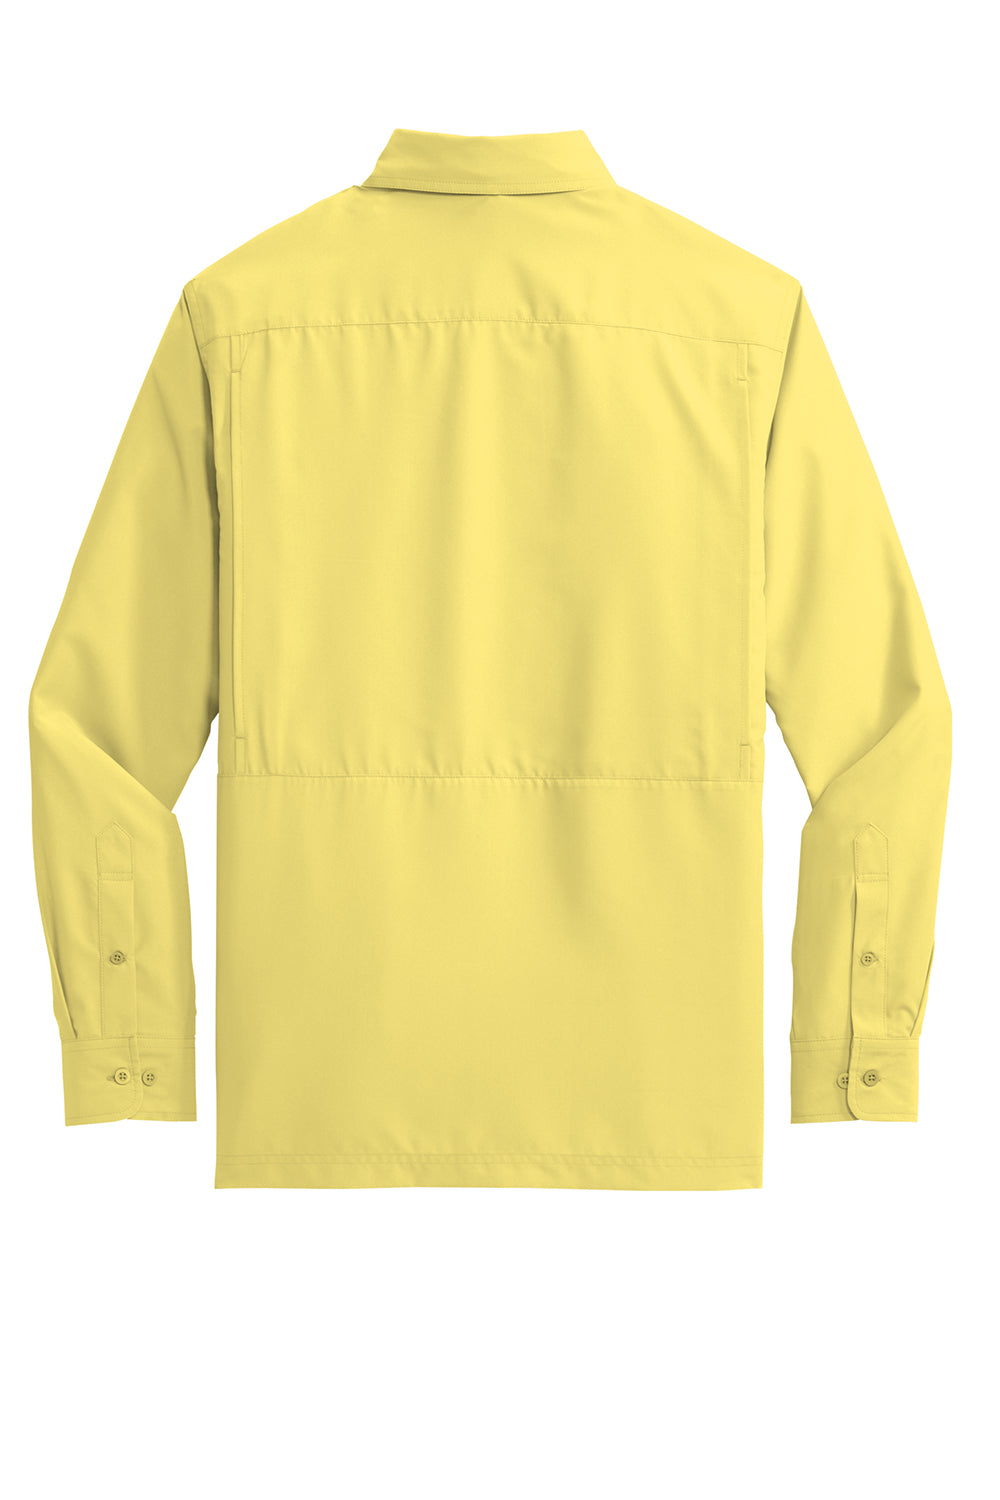 Port Authority W960 Mens Daybreak Moisture Wicking Long Sleeve Button Down Shirt w/ Double Pockets Yellow Flat Back